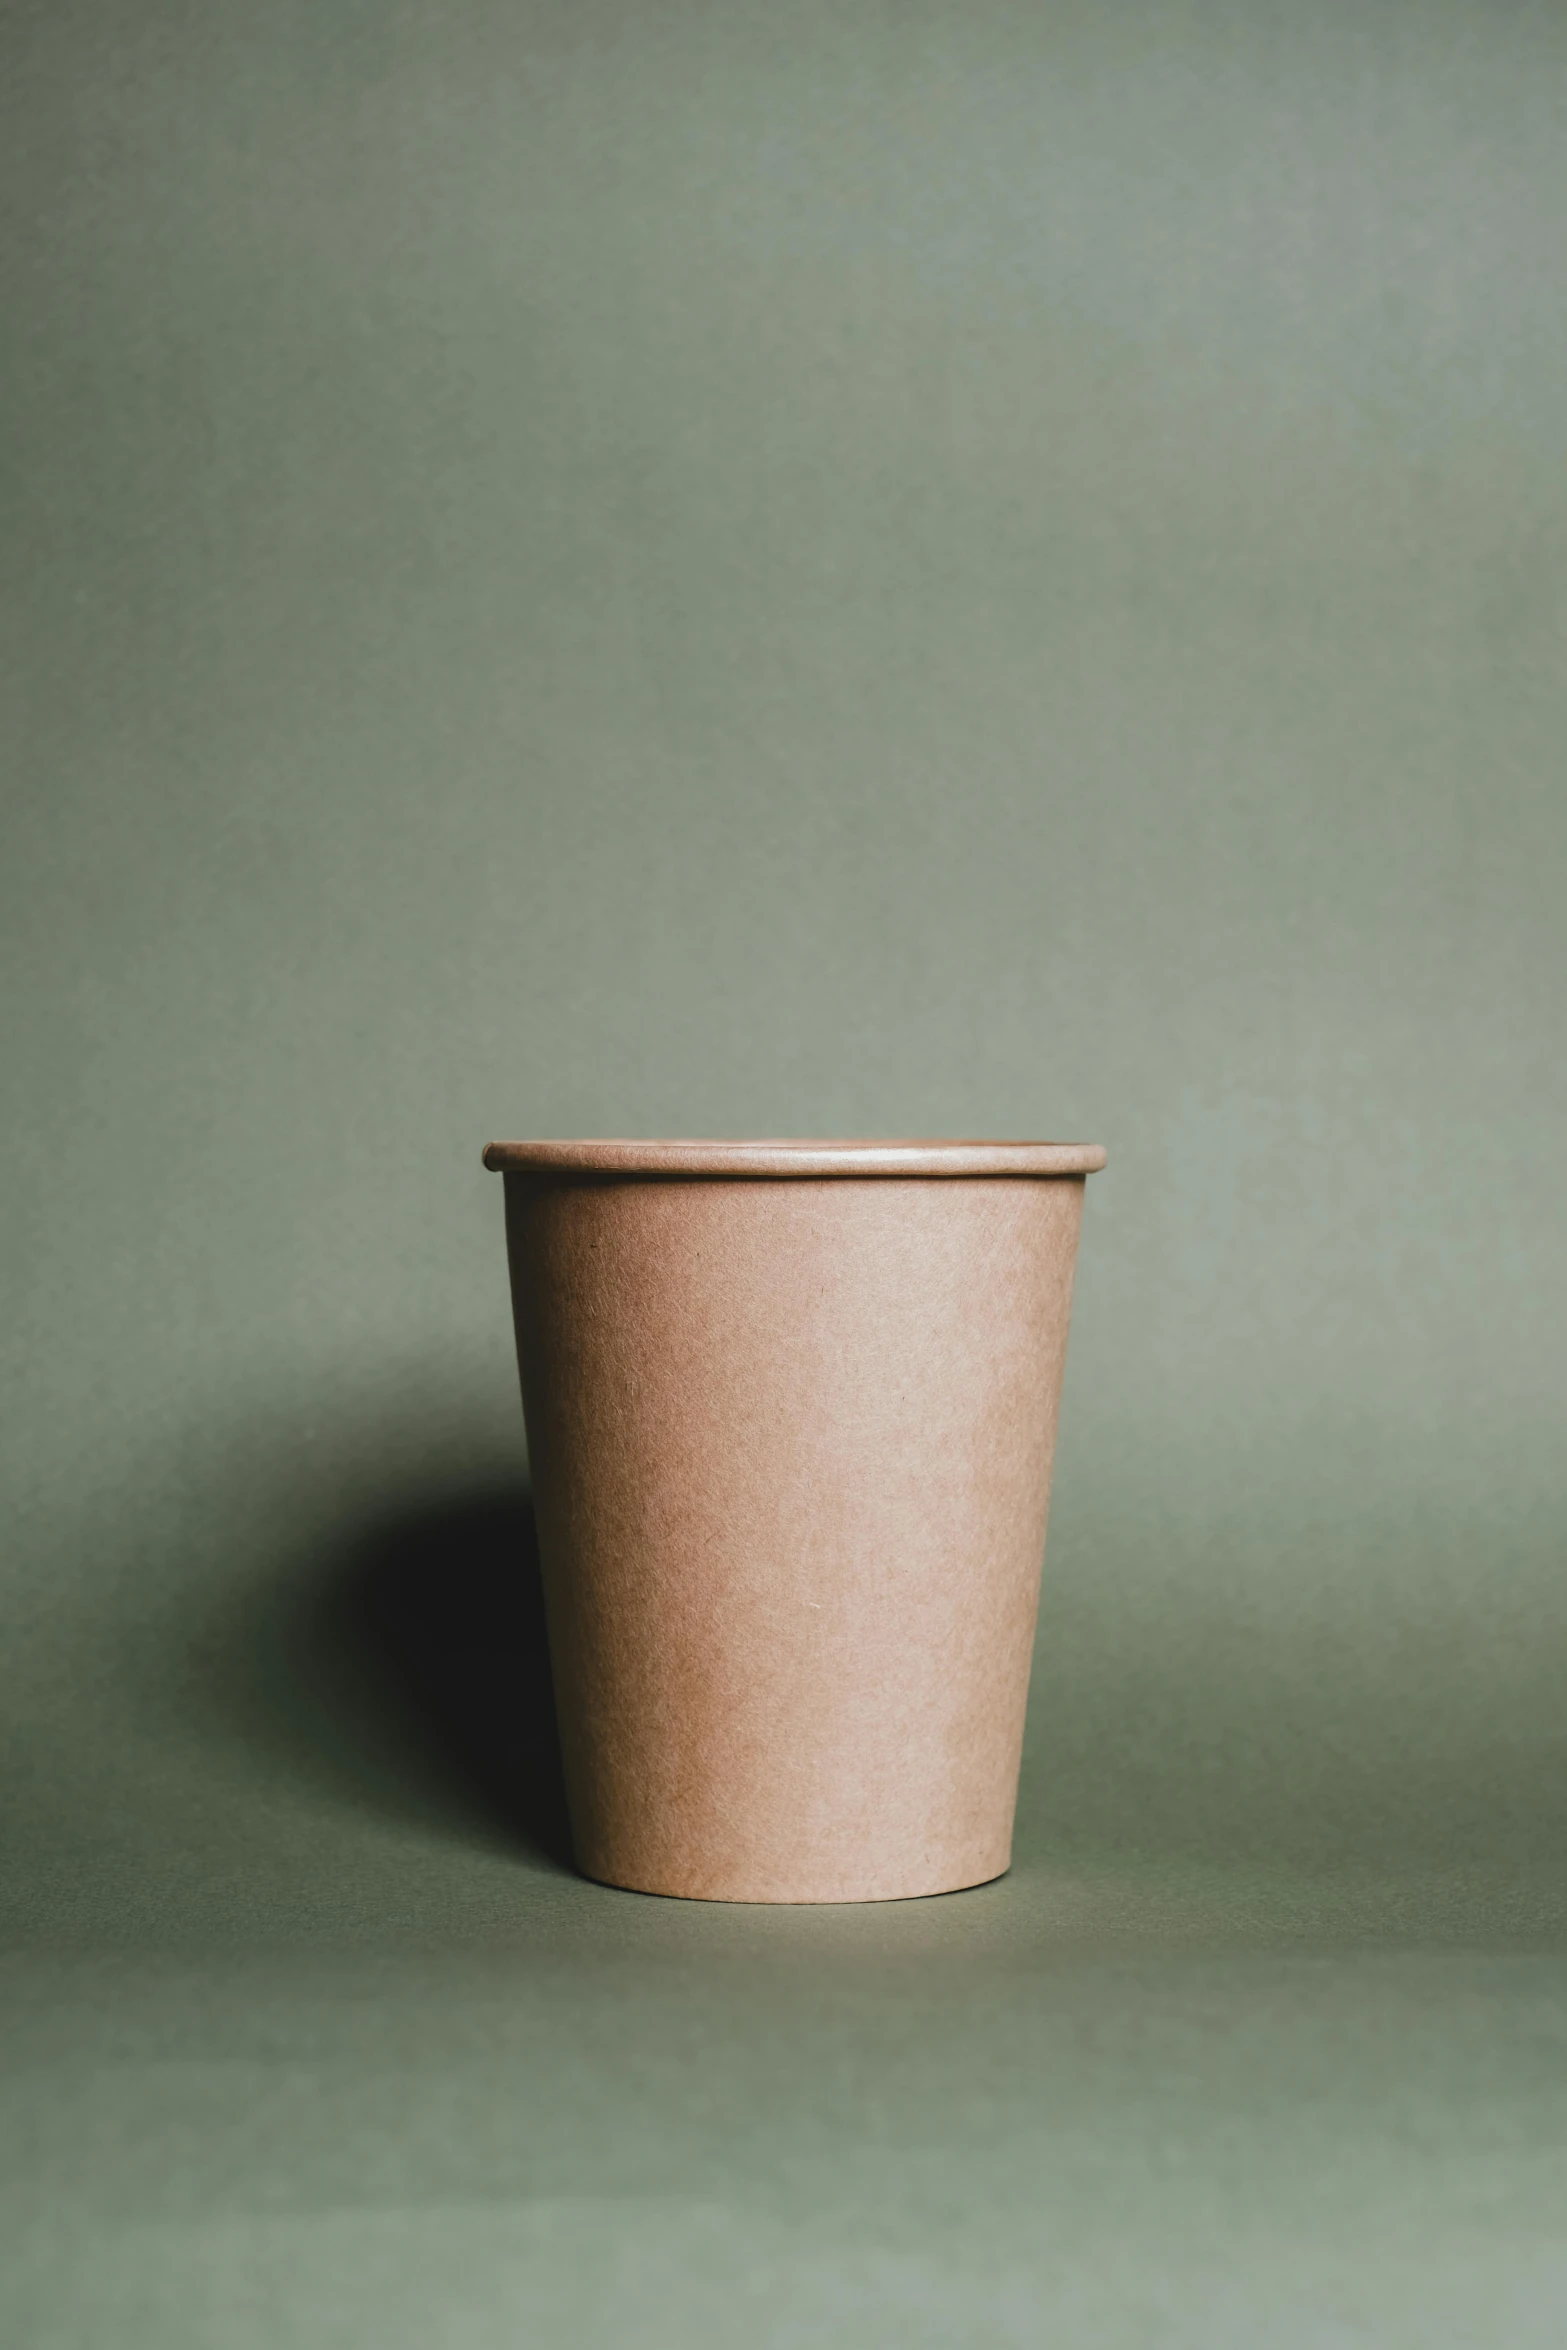 the large paper cup is shown on a grey background